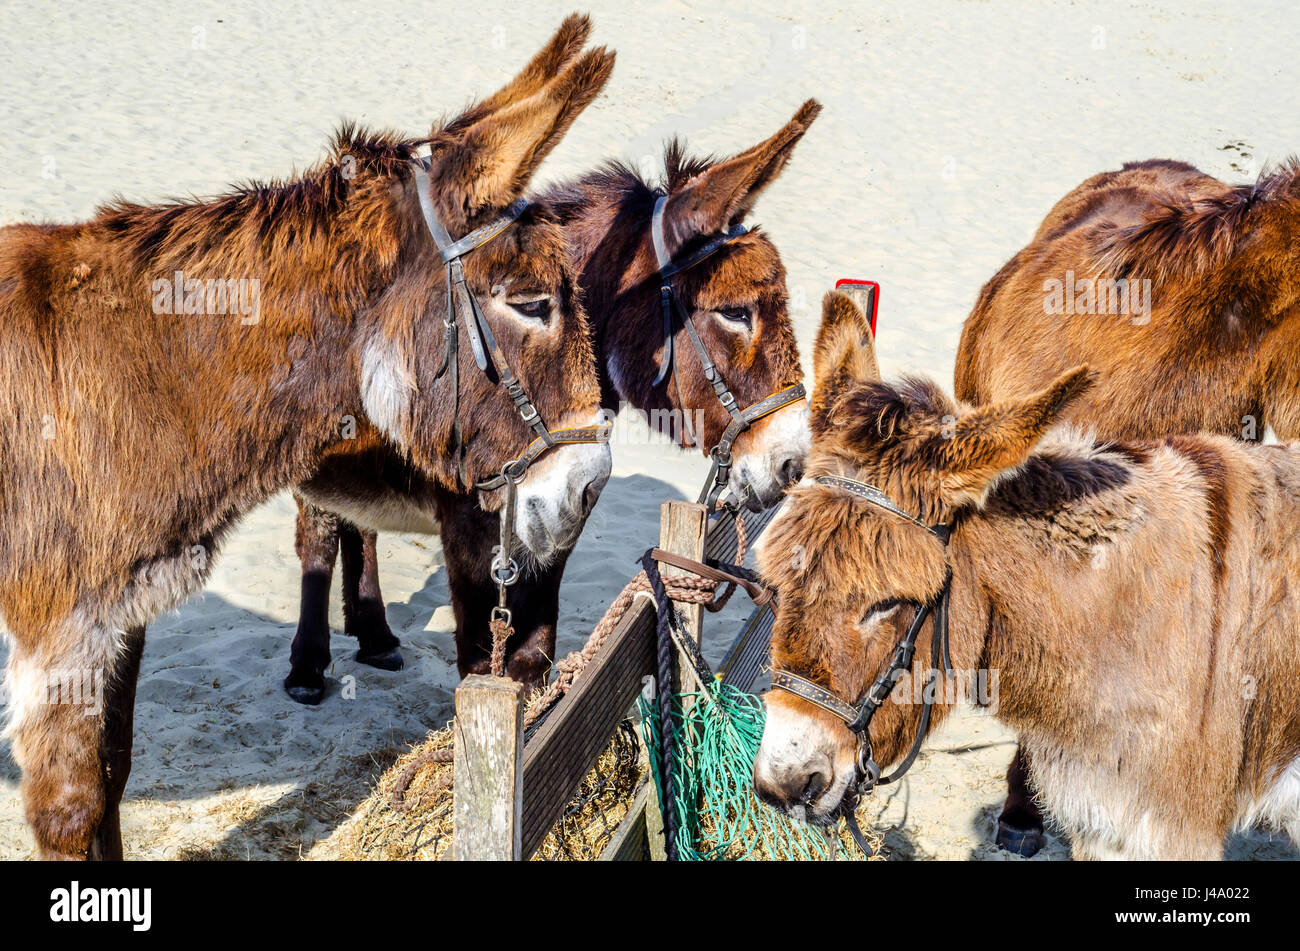 Four gorgeous domesticated asses, asses in a harness strapped to a